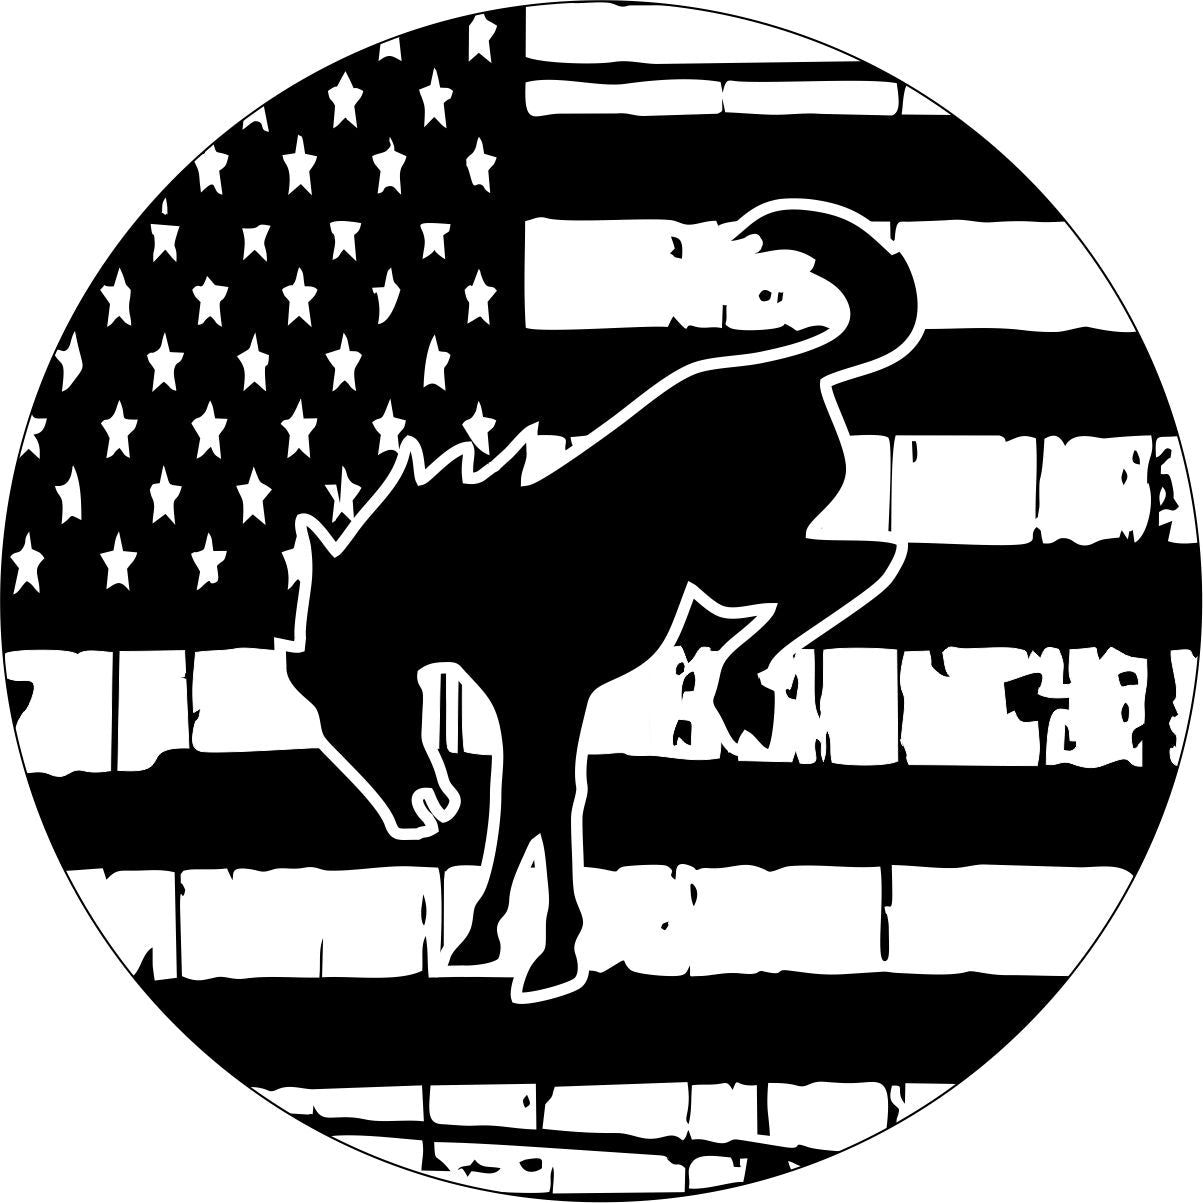 Bucking Bronco icon in front of a rustic painted American flag background spare tire cover design.